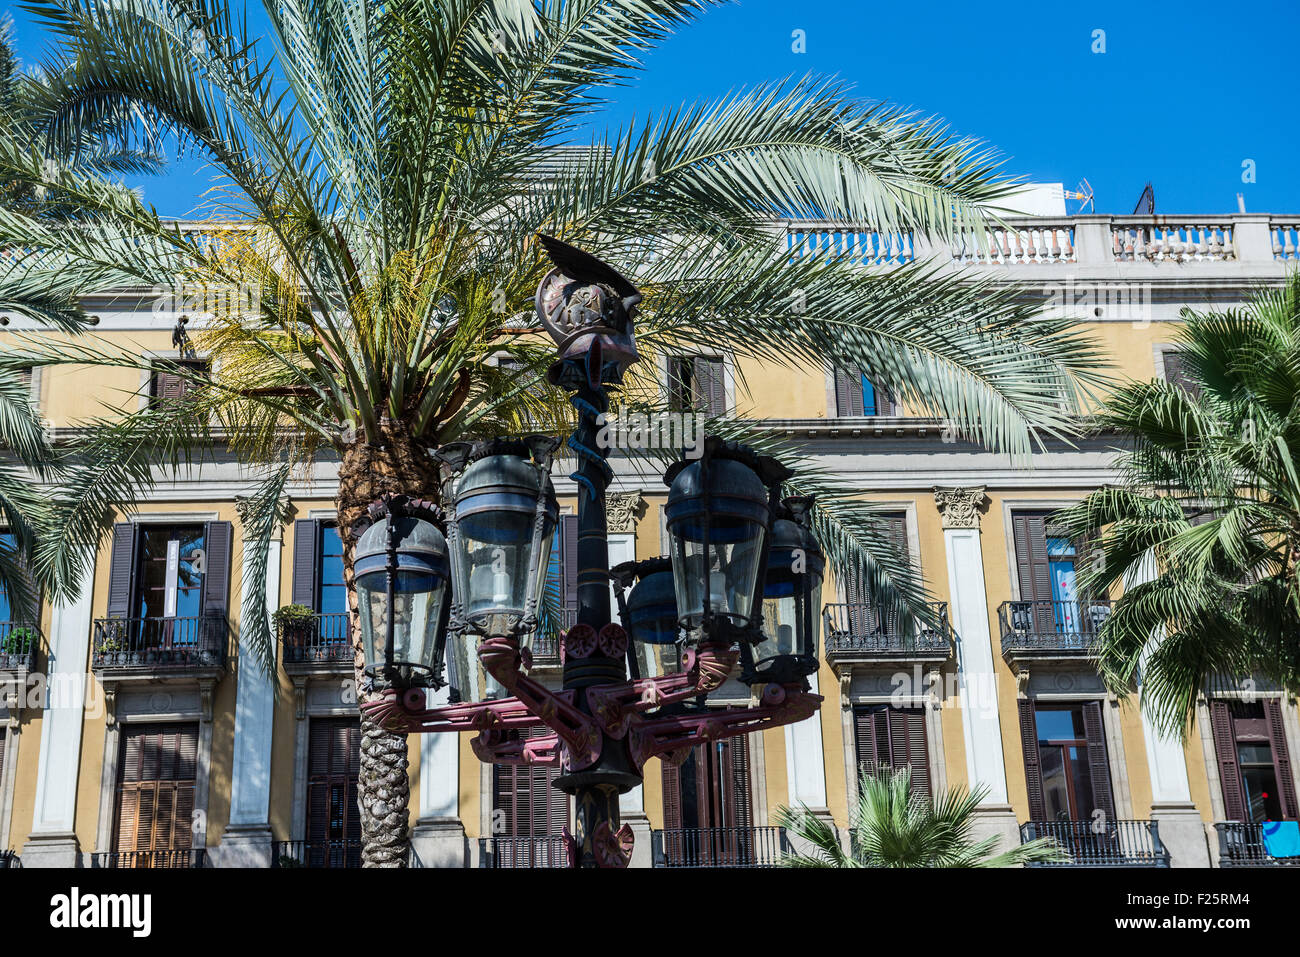 Lantern at Placa Reial (Royal Square) square in the Barri Gotic district of Barcelona, Catalonia, Spain Stock Photo